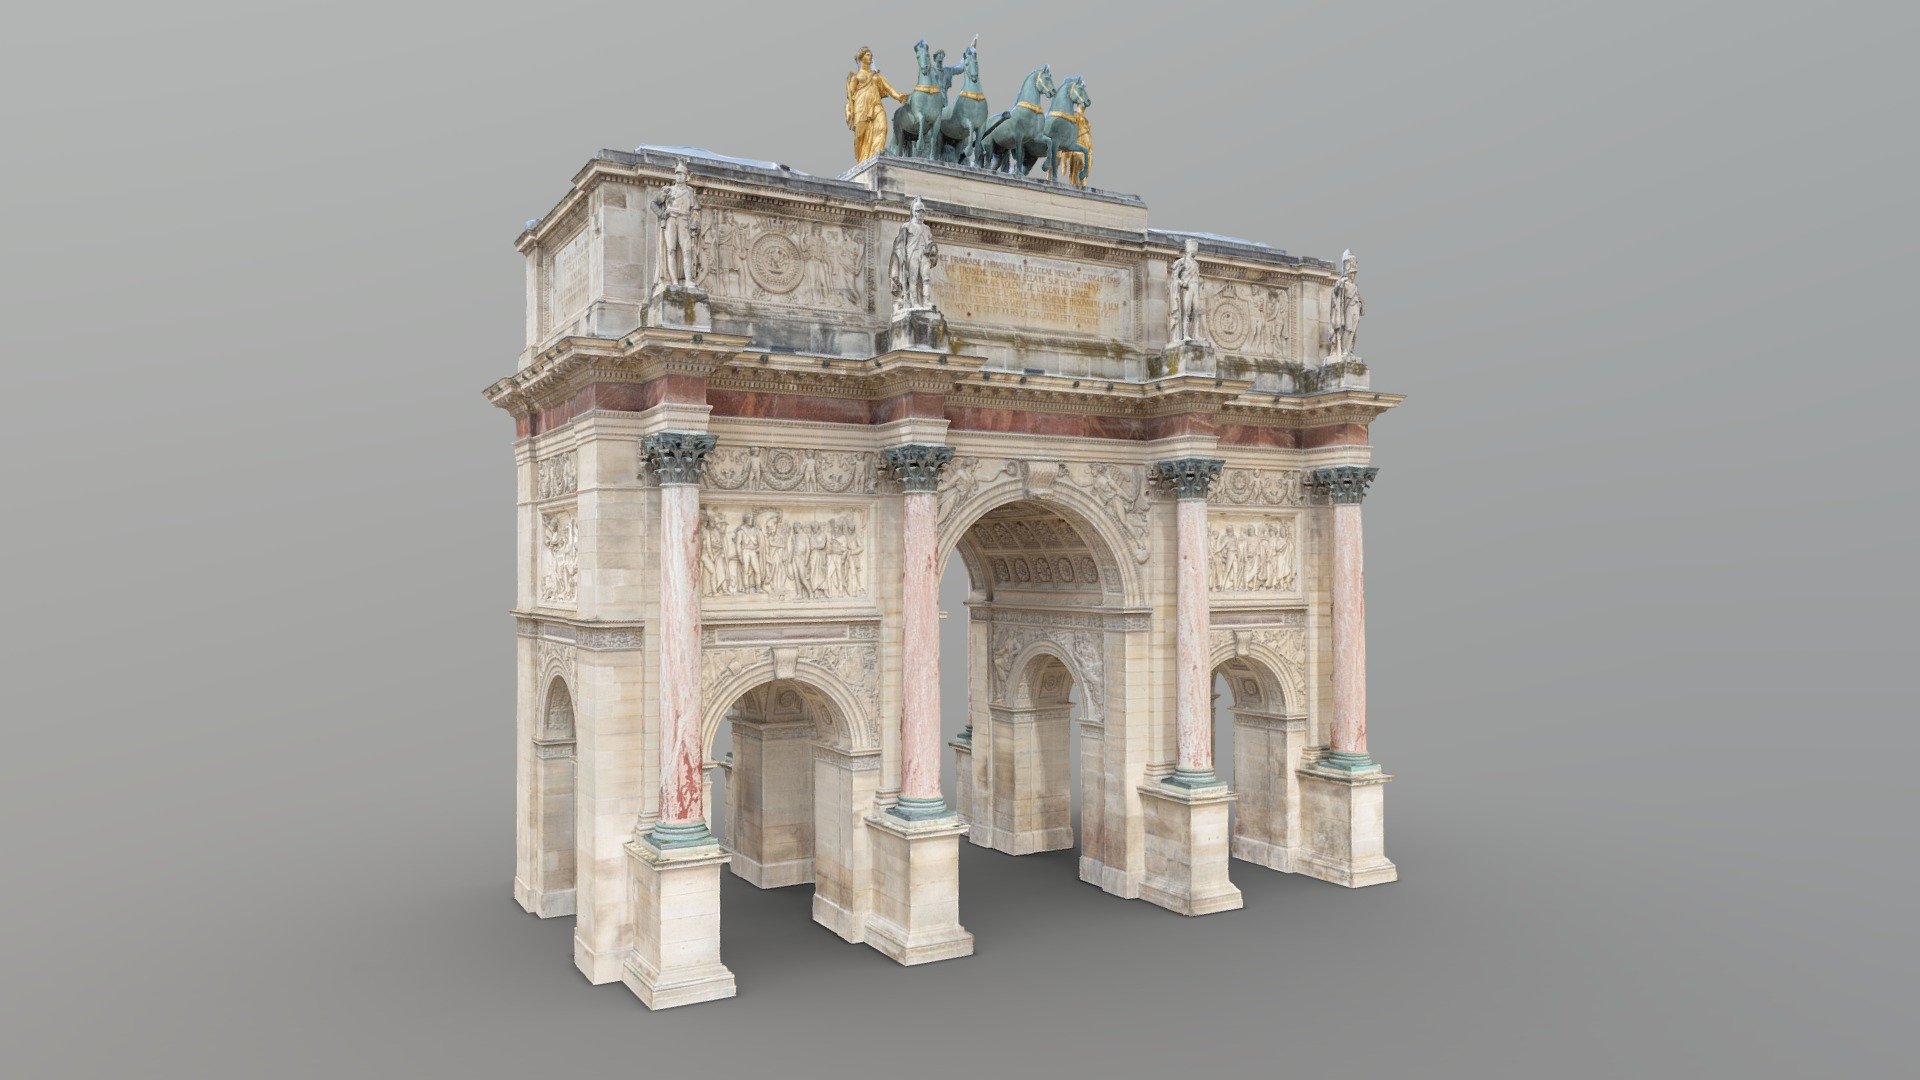 High poly photogrammetry model of the Arc de triomphe du Carrousel in Paris. It was built between 1806 and 1808 to commemorate Napoleon's military victories in the Wars of the Third and Fourth Coalitions (source: wikipedia). It is located near the Louvre Pyramid in the place du Carrousel. 

Reconstructed with Reality Capture (738 images from the ground).

8k and 16k textures (diffuse and normal).

Formats: .dae, .fbx, .stl, .obj - Arc de Triomphe du Carrousel, Louvre - Buy Royalty Free 3D model by Nicolas Diolez (@nicolasdiolez) 3d model